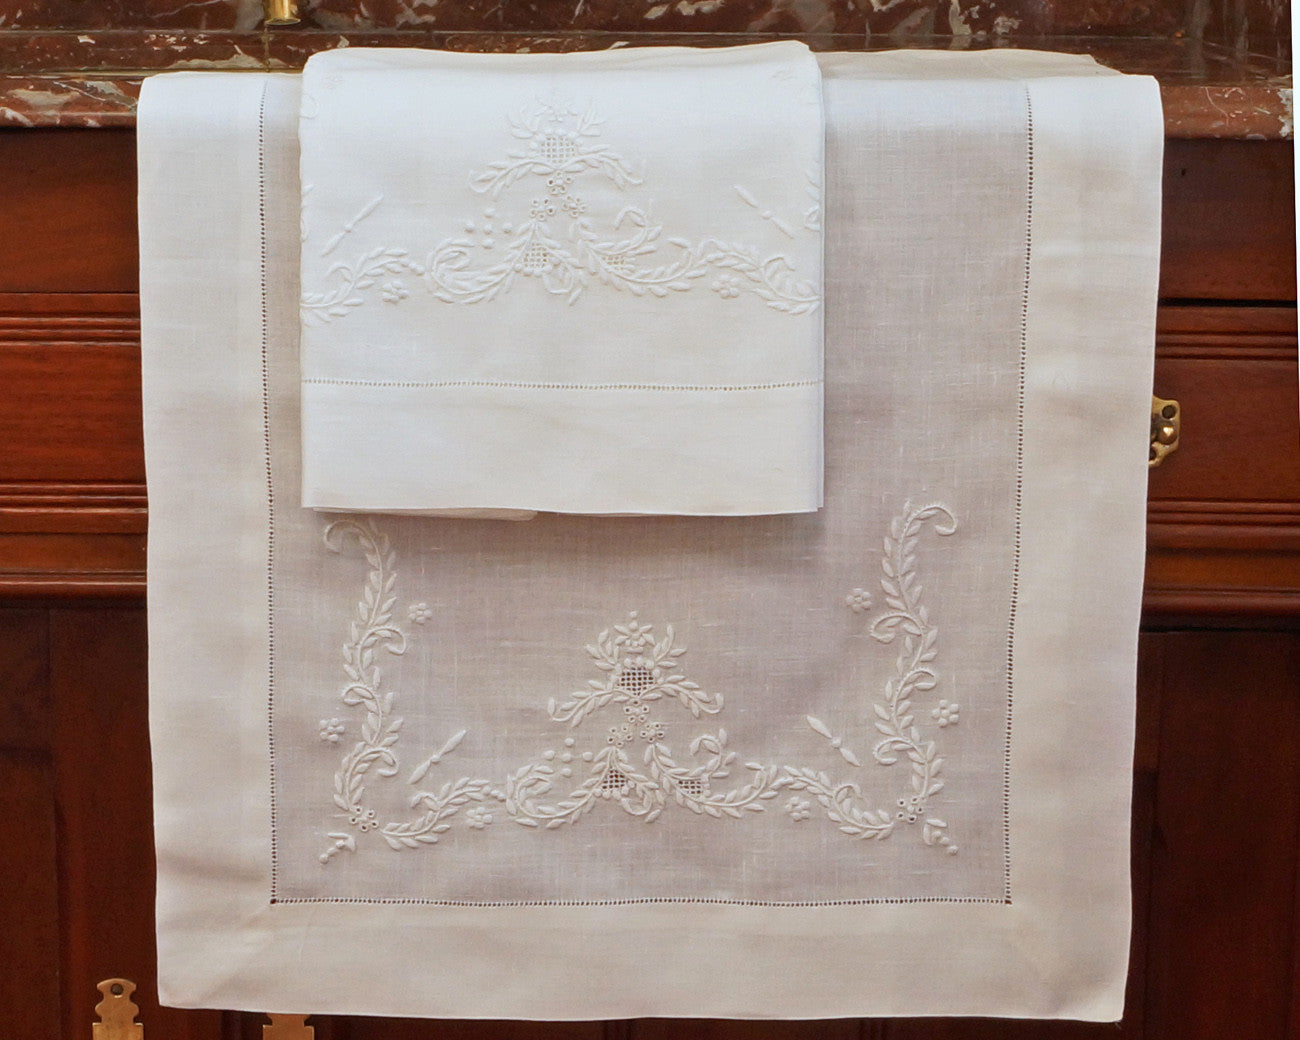 linen guest towel. Hand embroidered
in white work type embroidery